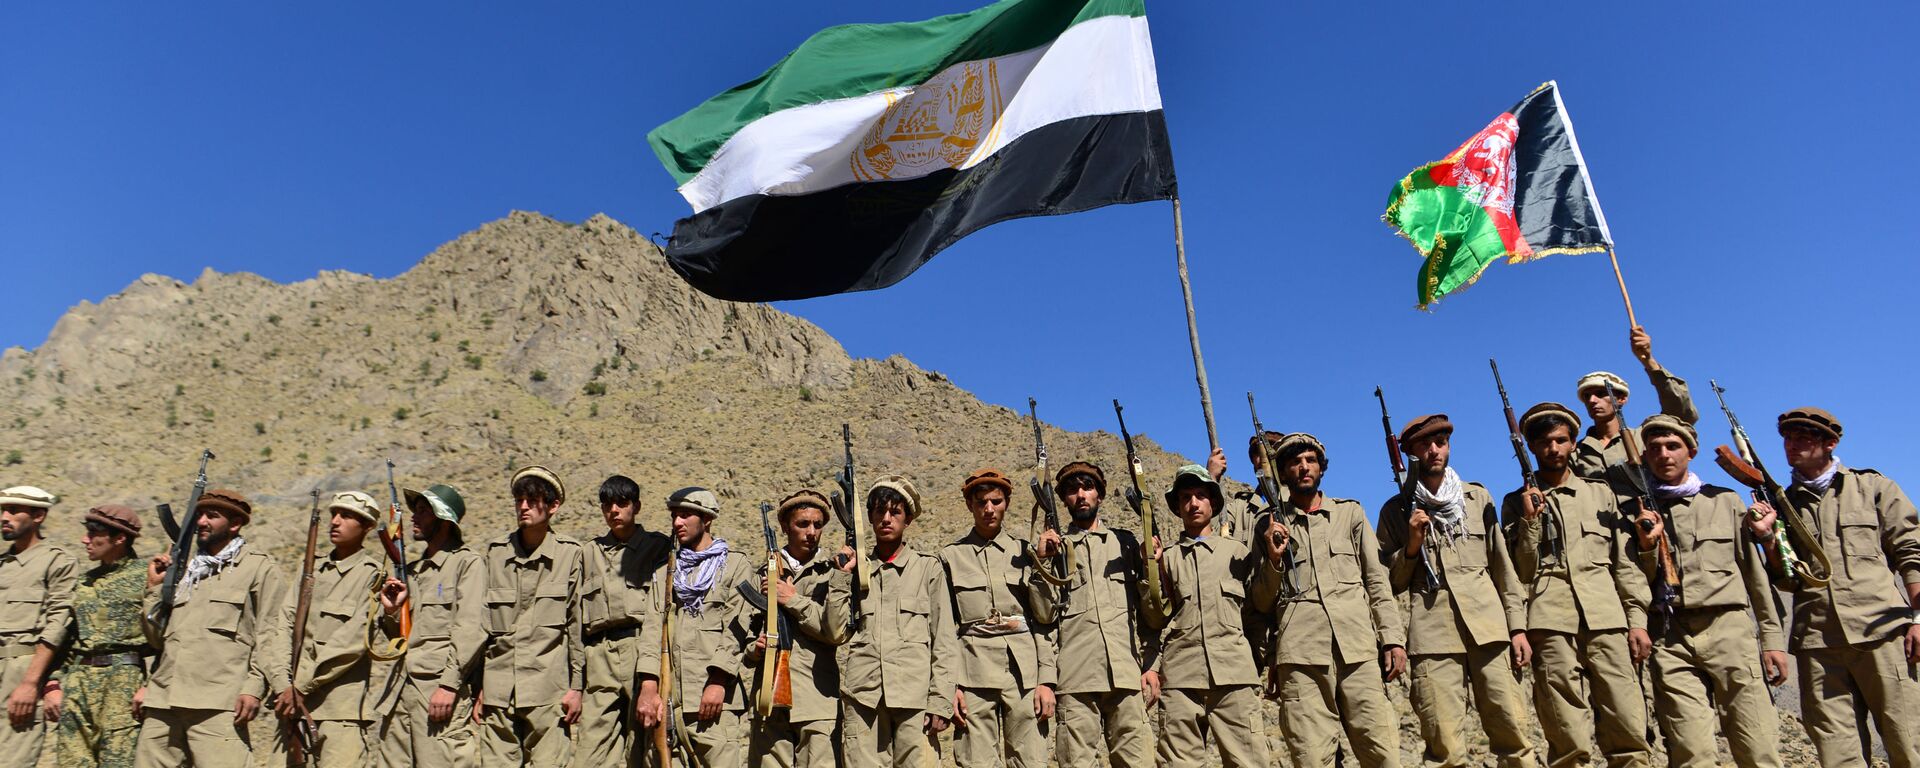 Afghan resistance movement and anti-Taliban uprising forces take part in a military training at Malimah area of Dara district in Panjshir province on September 2, 2021 as the valley remains the last major holdout of anti-Taliban forces. - Sputnik International, 1920, 28.12.2021